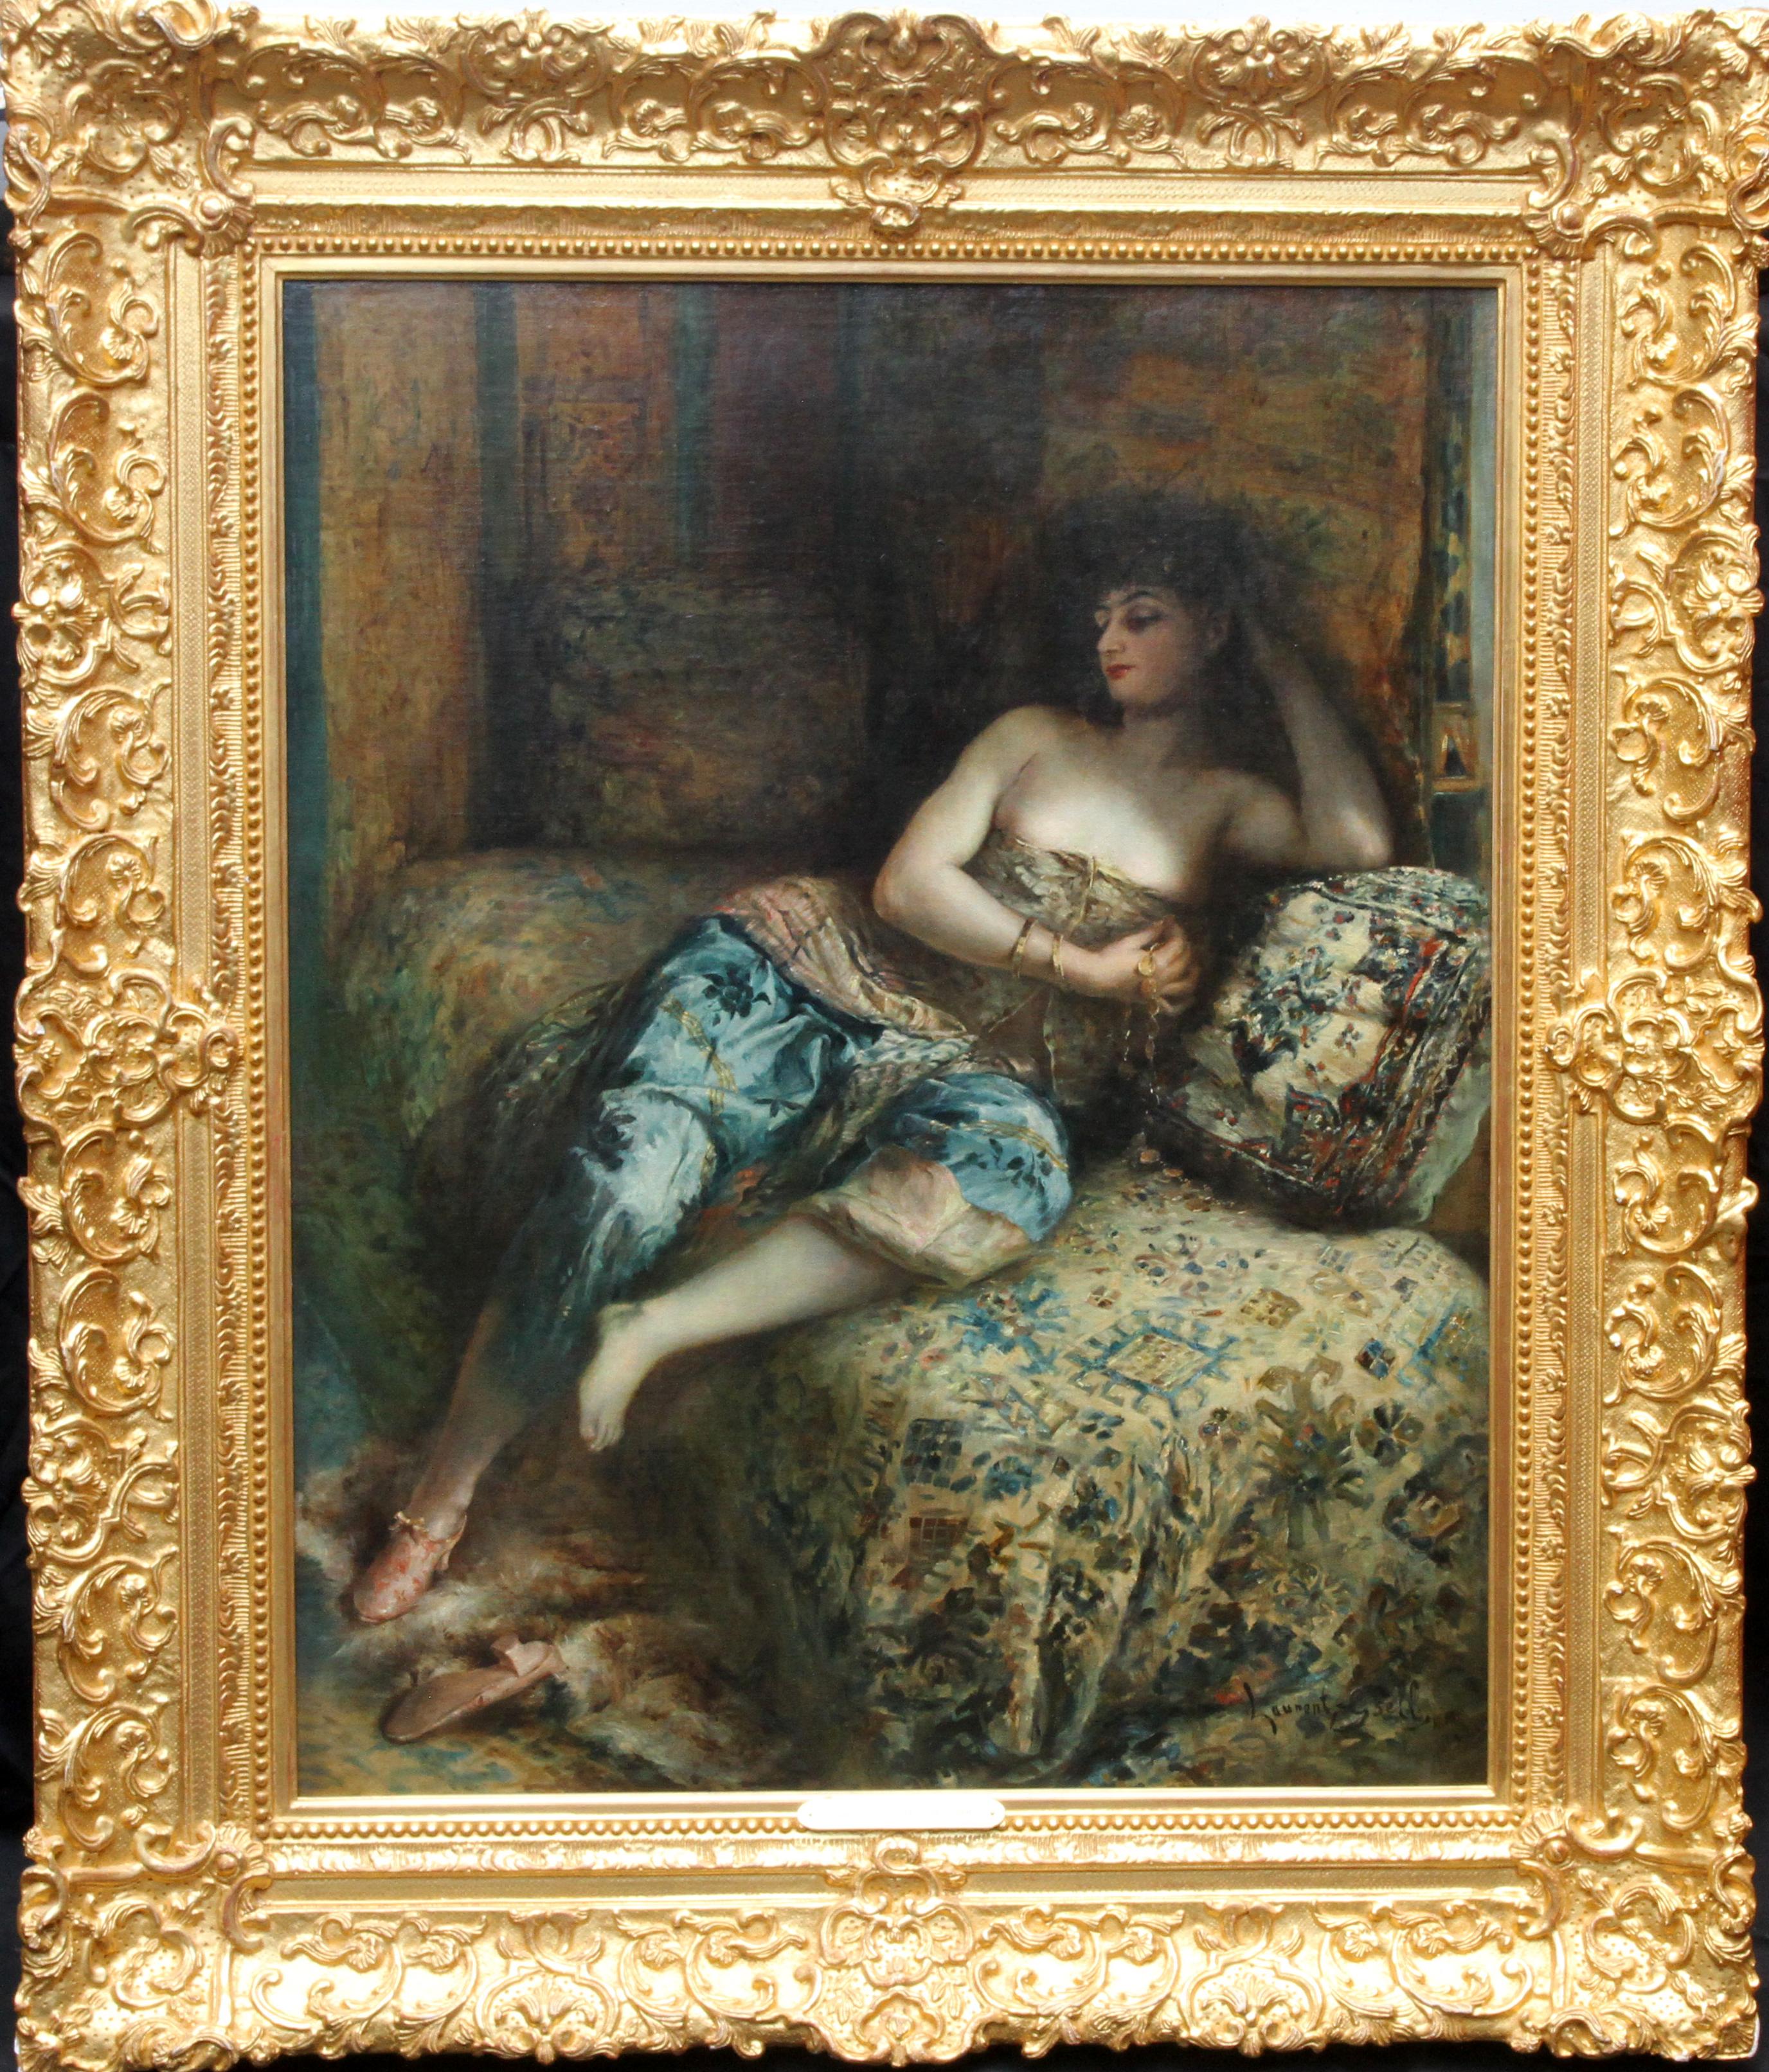 Lucien Laurent Gsell Interior Painting - Odalisque - Woman in a Harem - French 1900 Orientalist art portrait oil painting